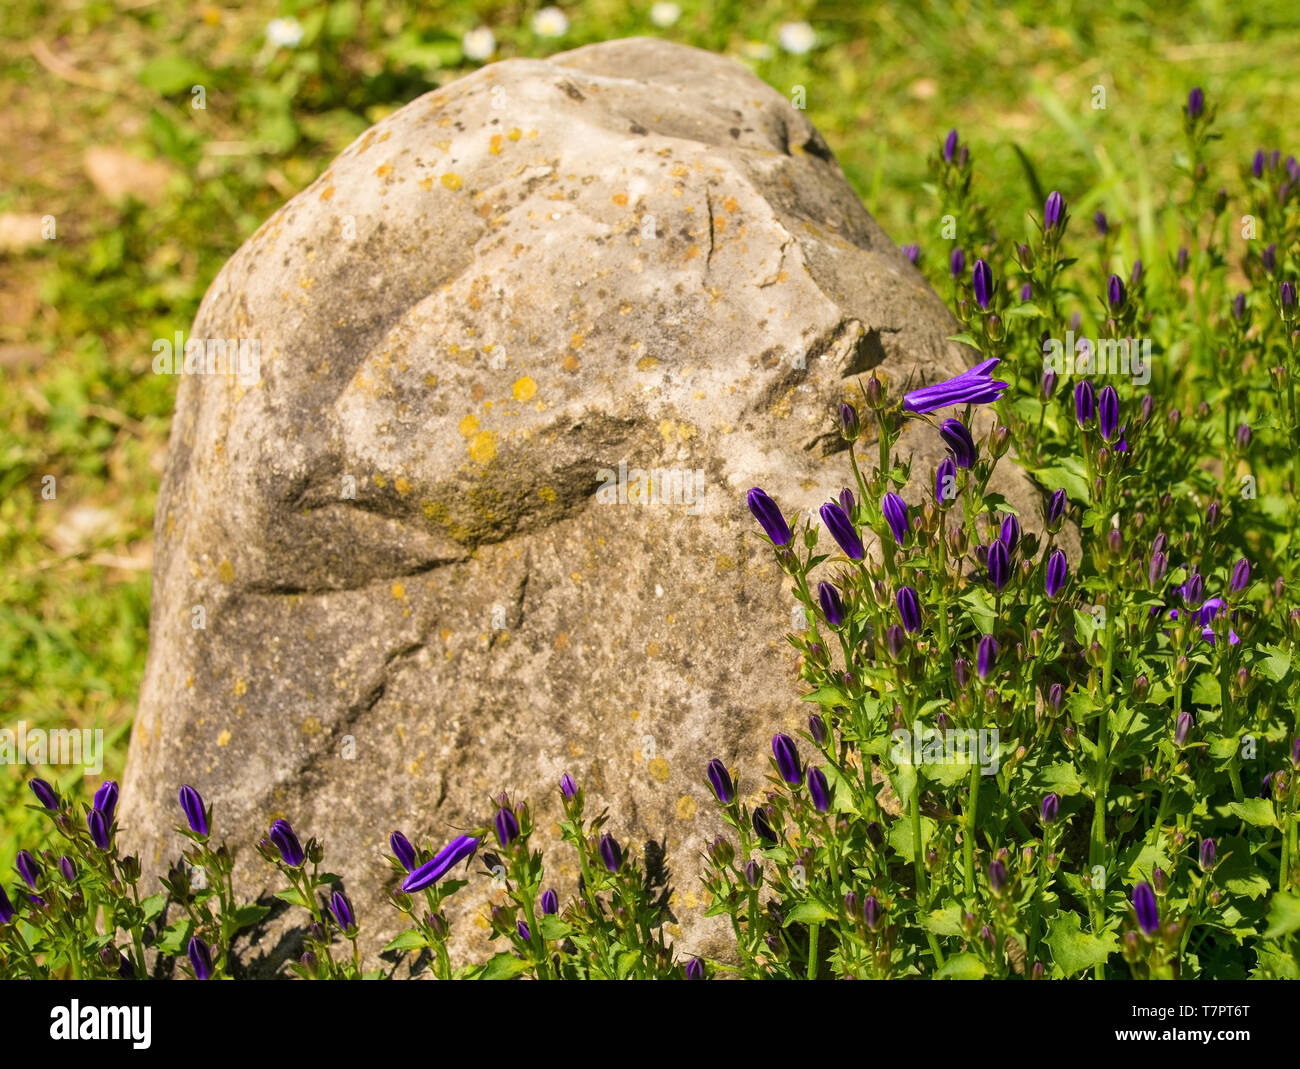 Purple flowers starting to appear on a perennial herbaceous campanula plant, commonly called bellfower, growing in north east Italy Stock Photo